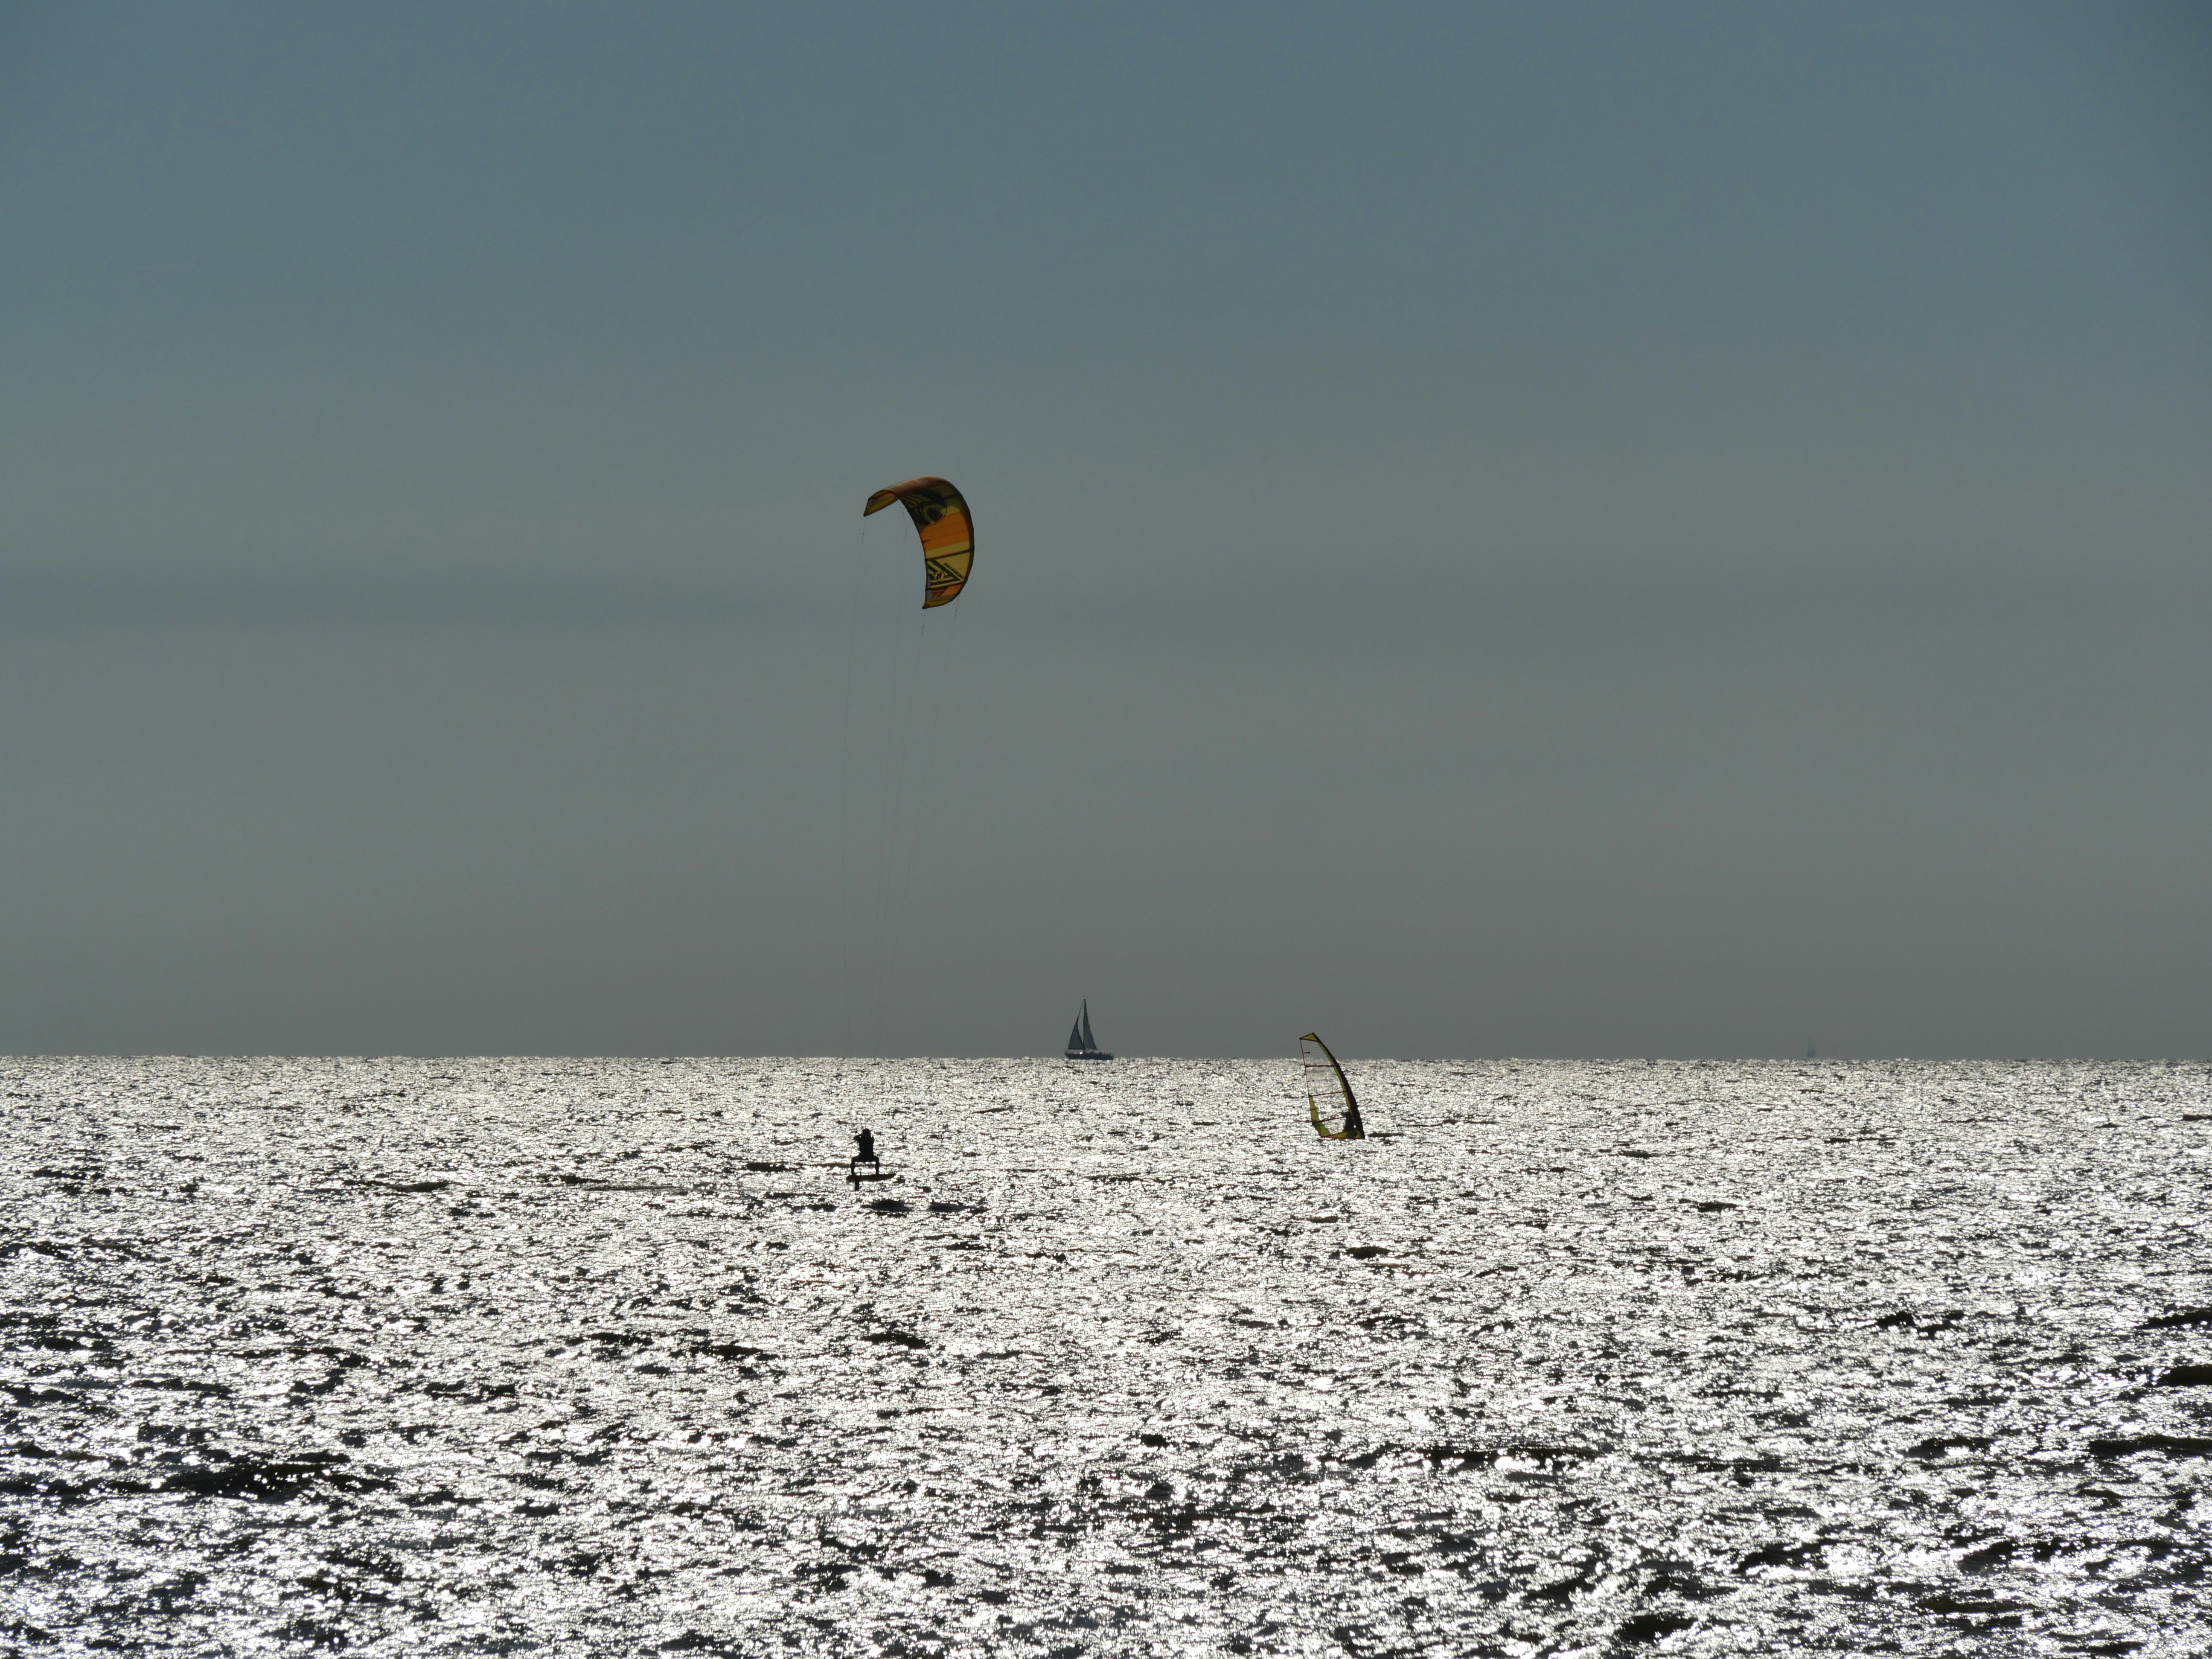 yellow and black kite surfing on sea during daytime